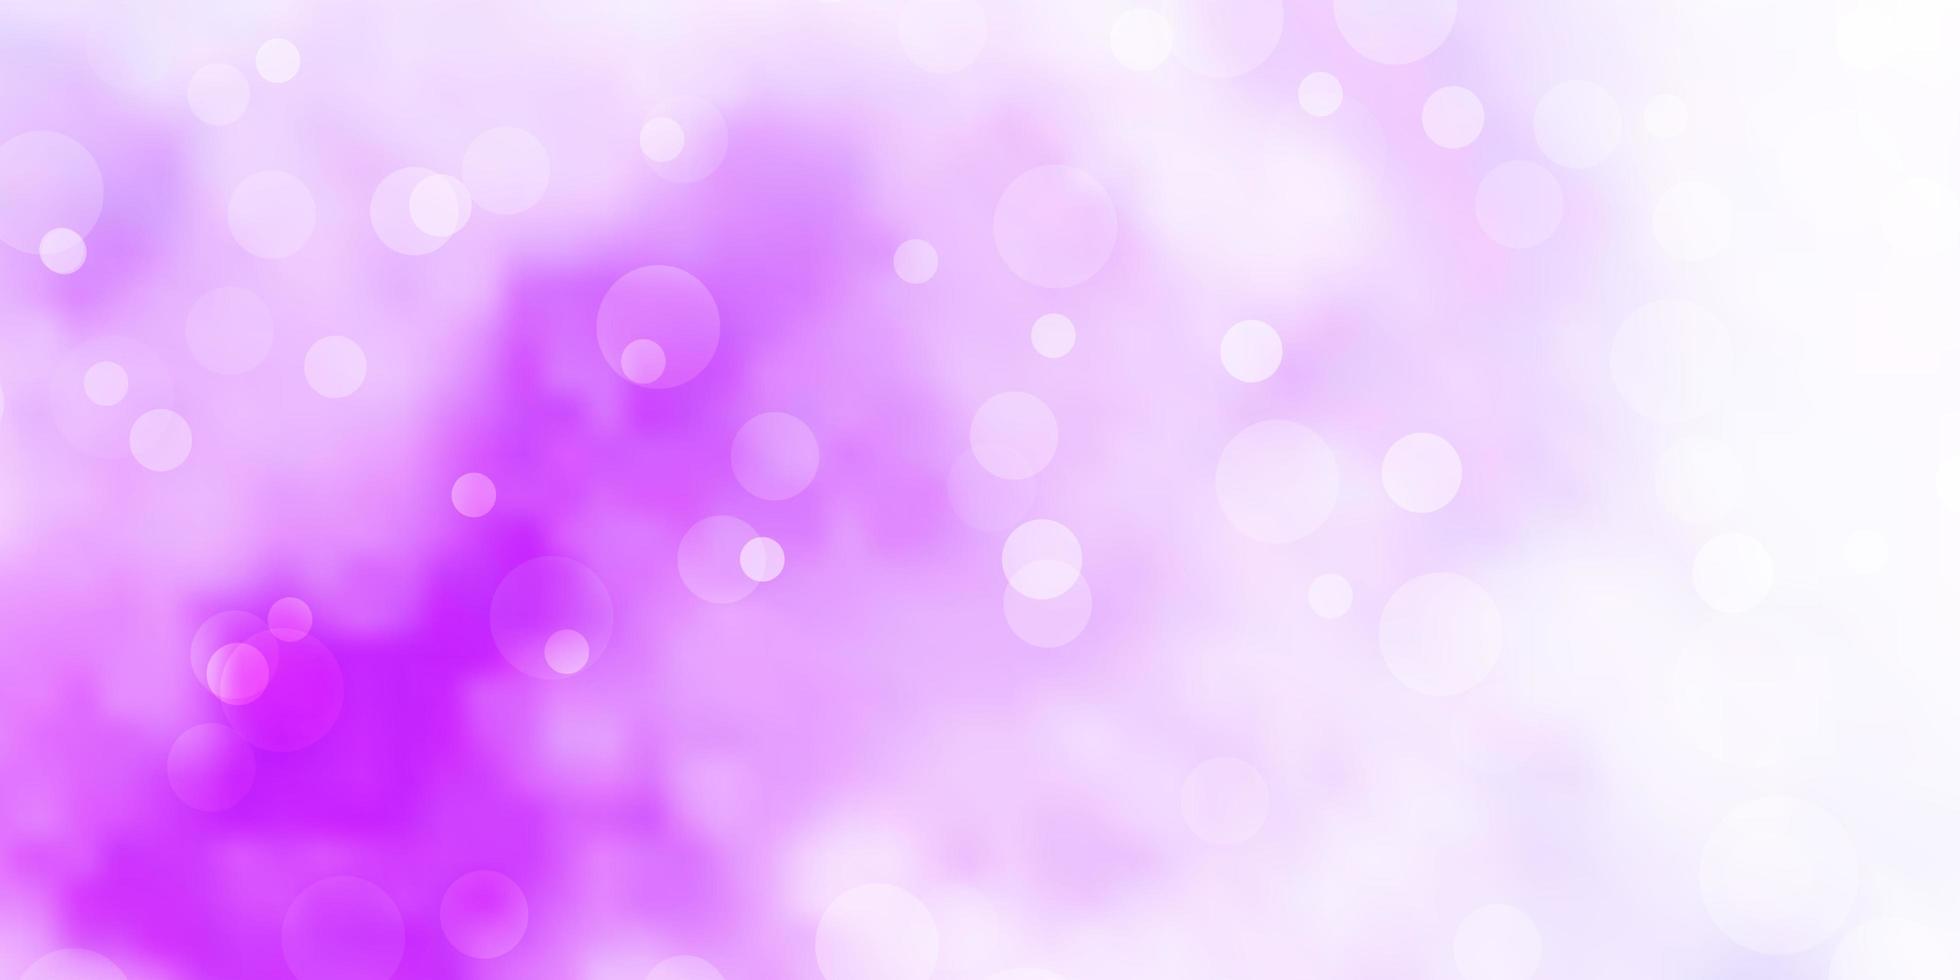 Light Purple vector layout with circle shapes